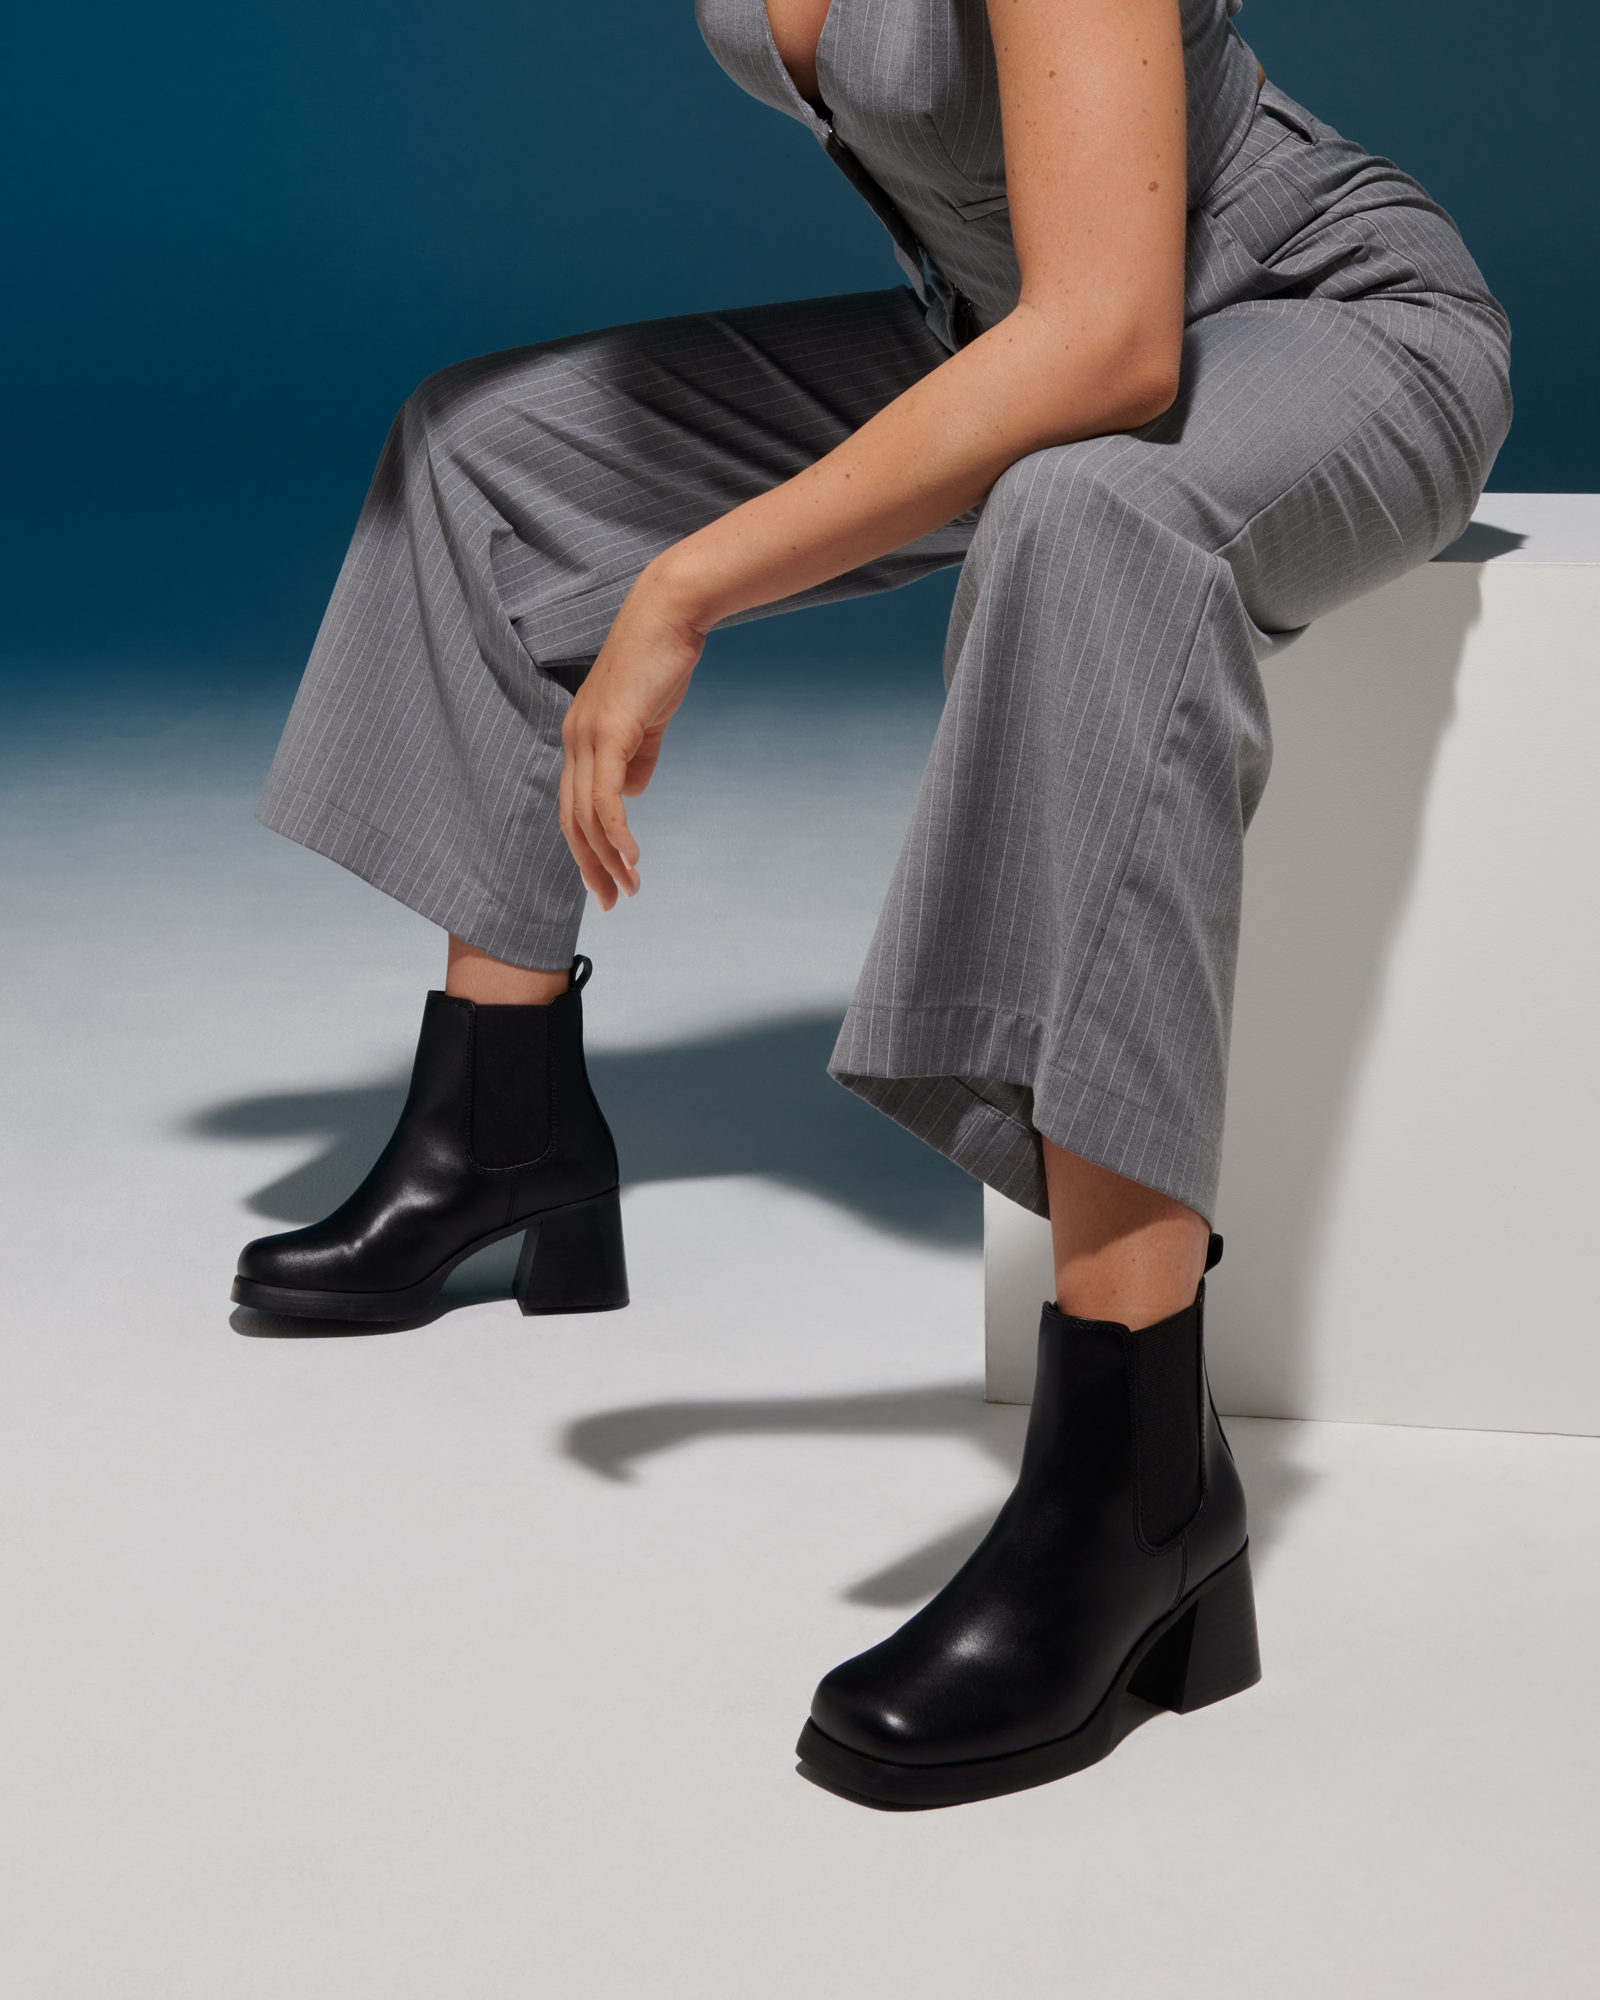 Therapy Shoes Defy Black | Women's Boots | Ankle | Dress | Platform 